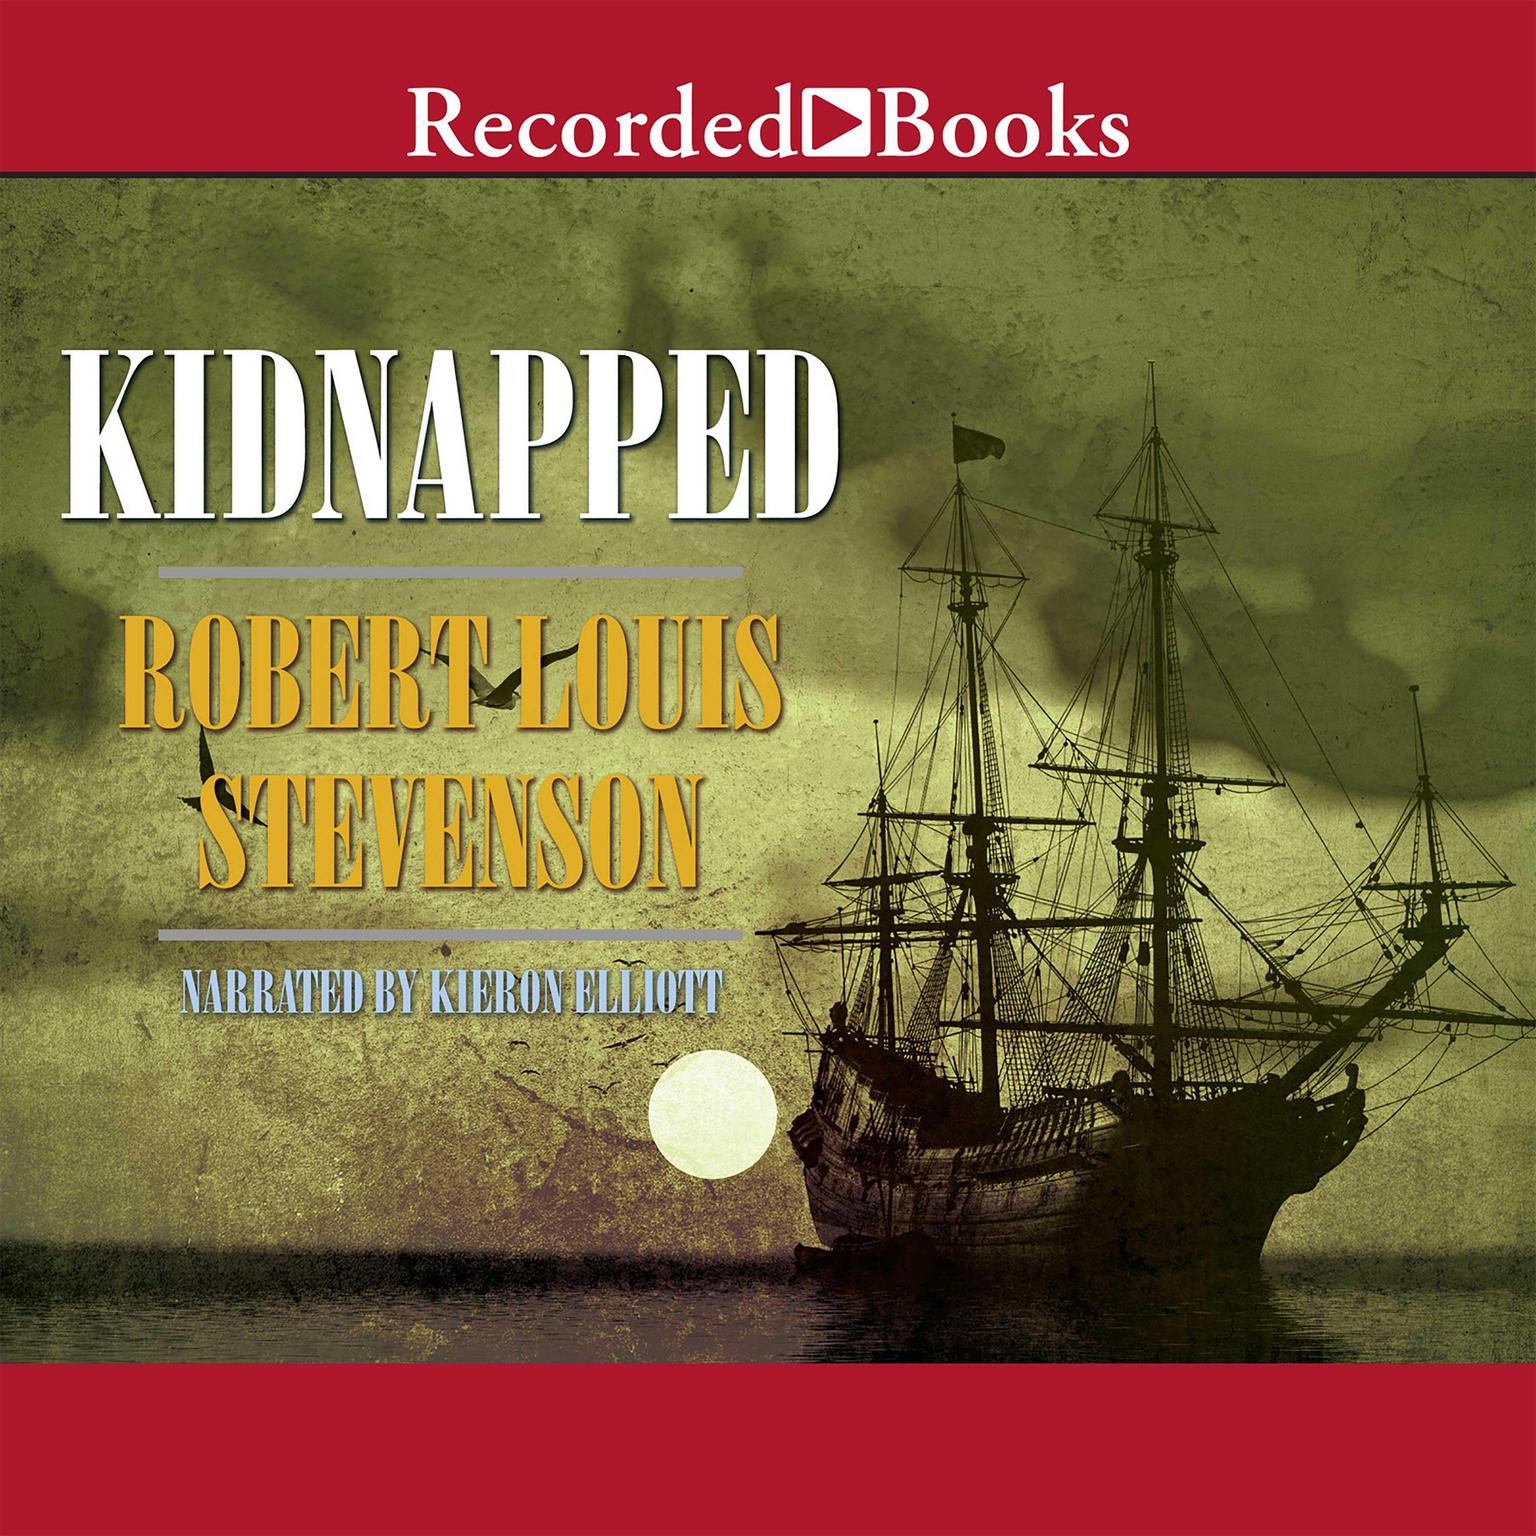 Kidnapped (new recording) Audiobook, by Robert Louis Stevenson